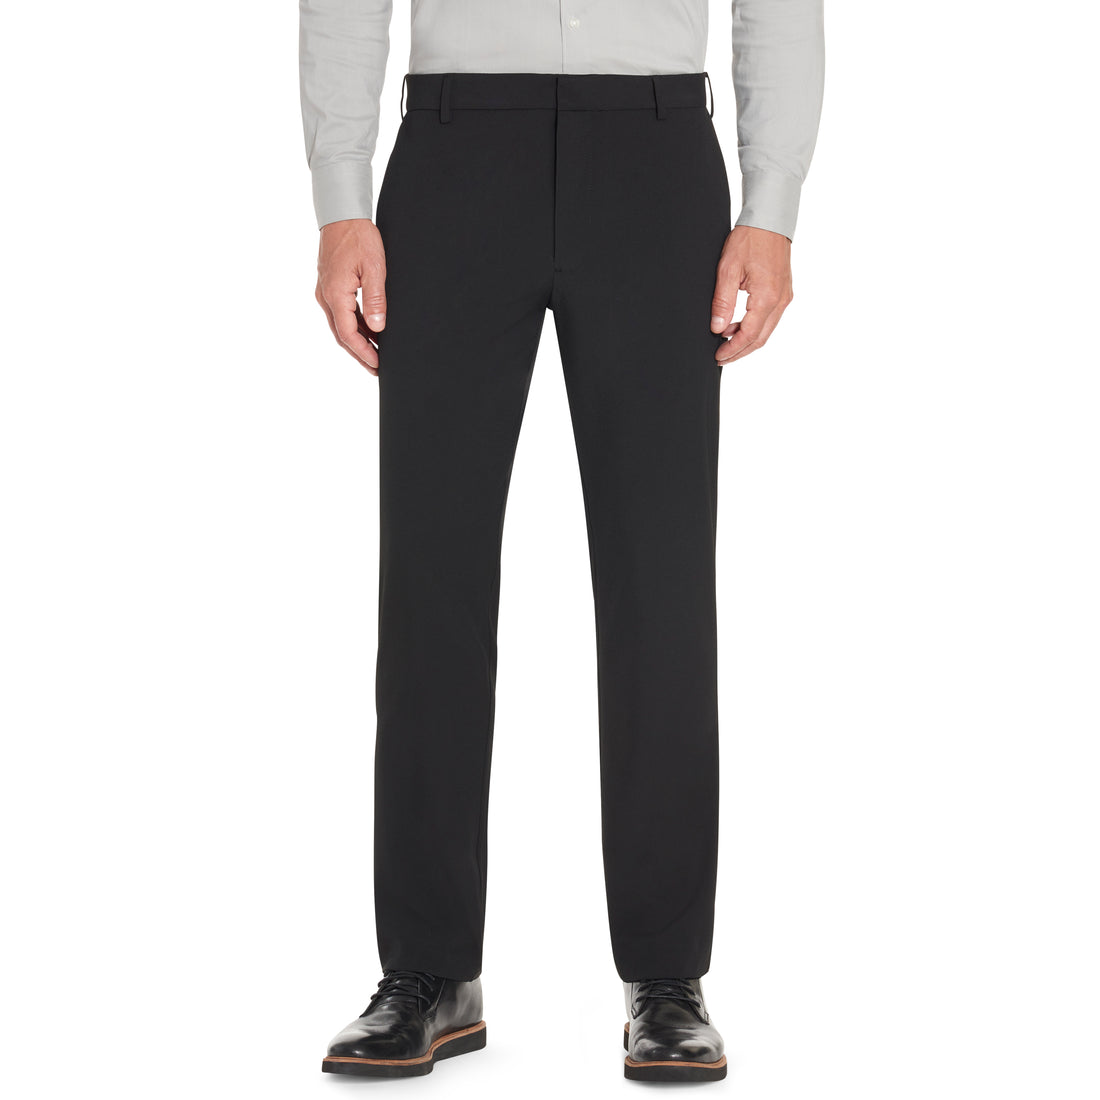 4-Way Stretch Dress Pant for Men Straight Slim Fit Flat Front